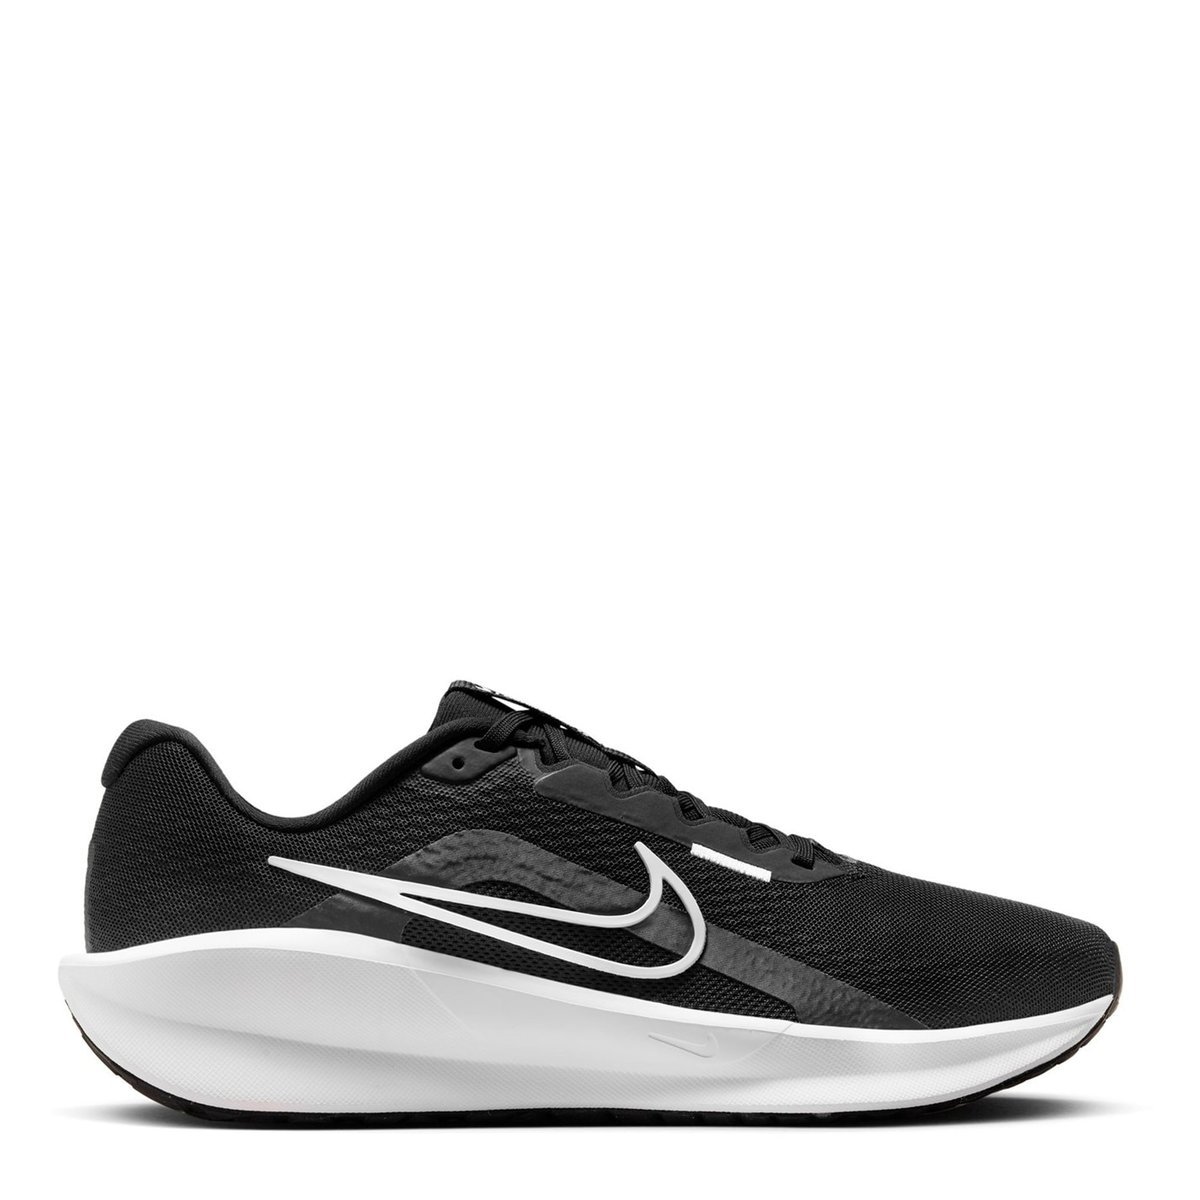 Size 13 Nike Nike DOWNSHIFTER 13 trainers